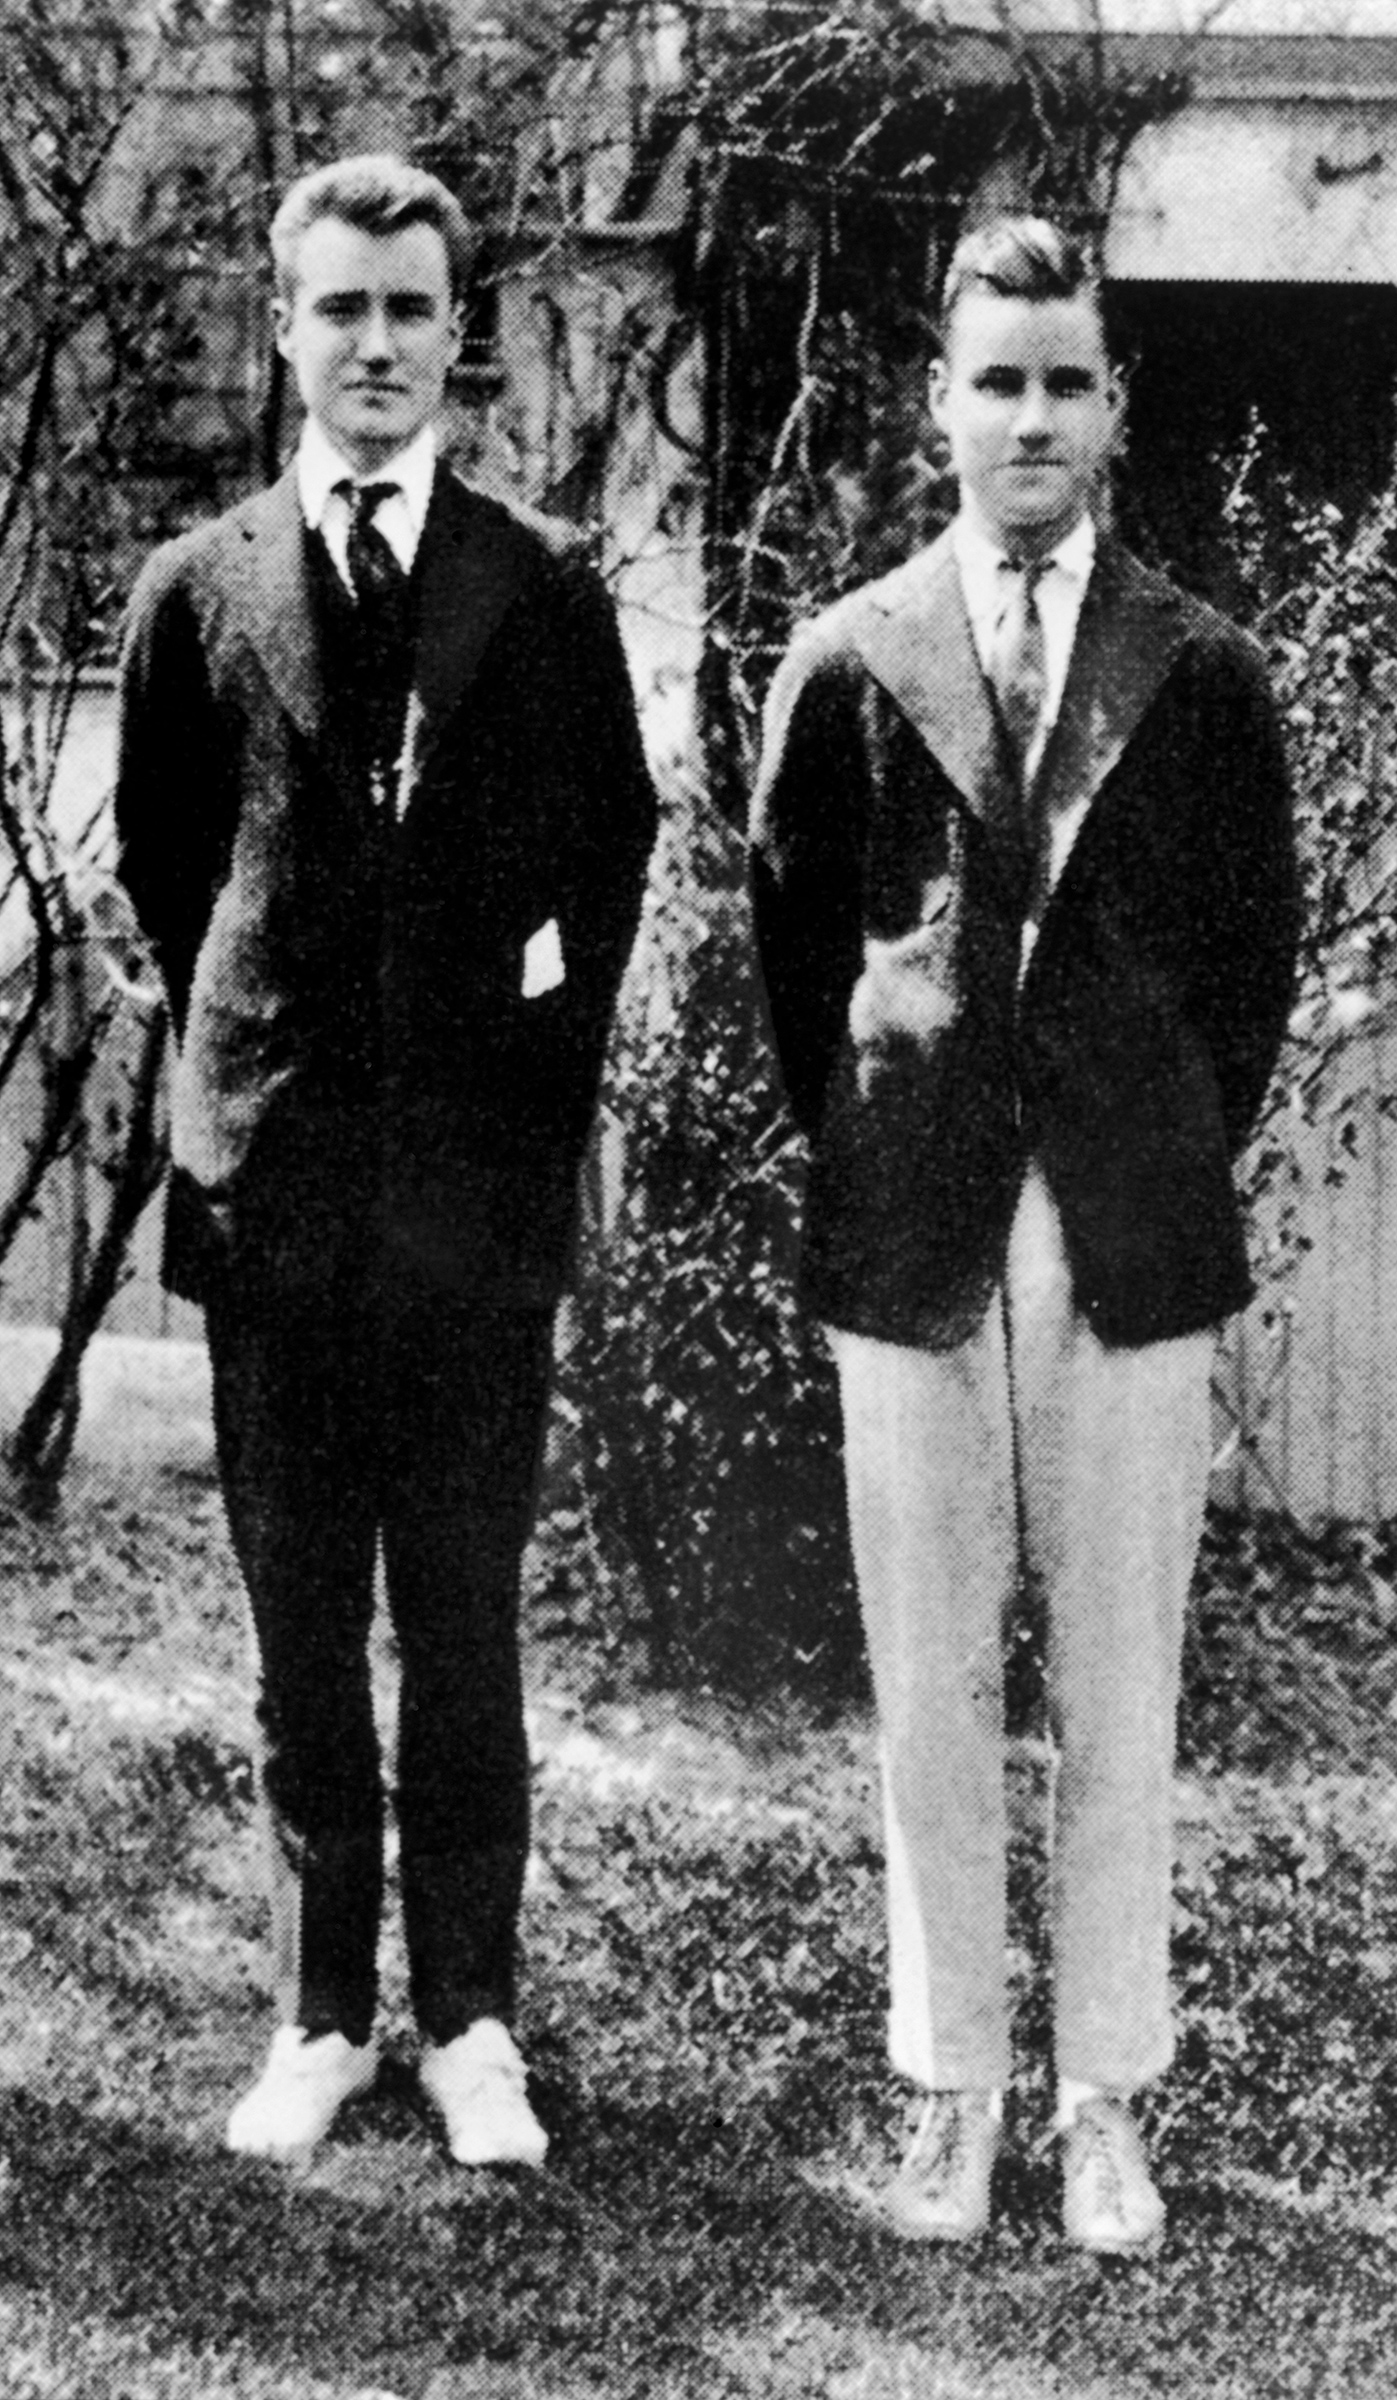 The future co-founders of TIME, Henry Luce (left) and Briton Hadden (right), at Hotchkiss Prepatory School in Lakeville, Conn., in 1916.